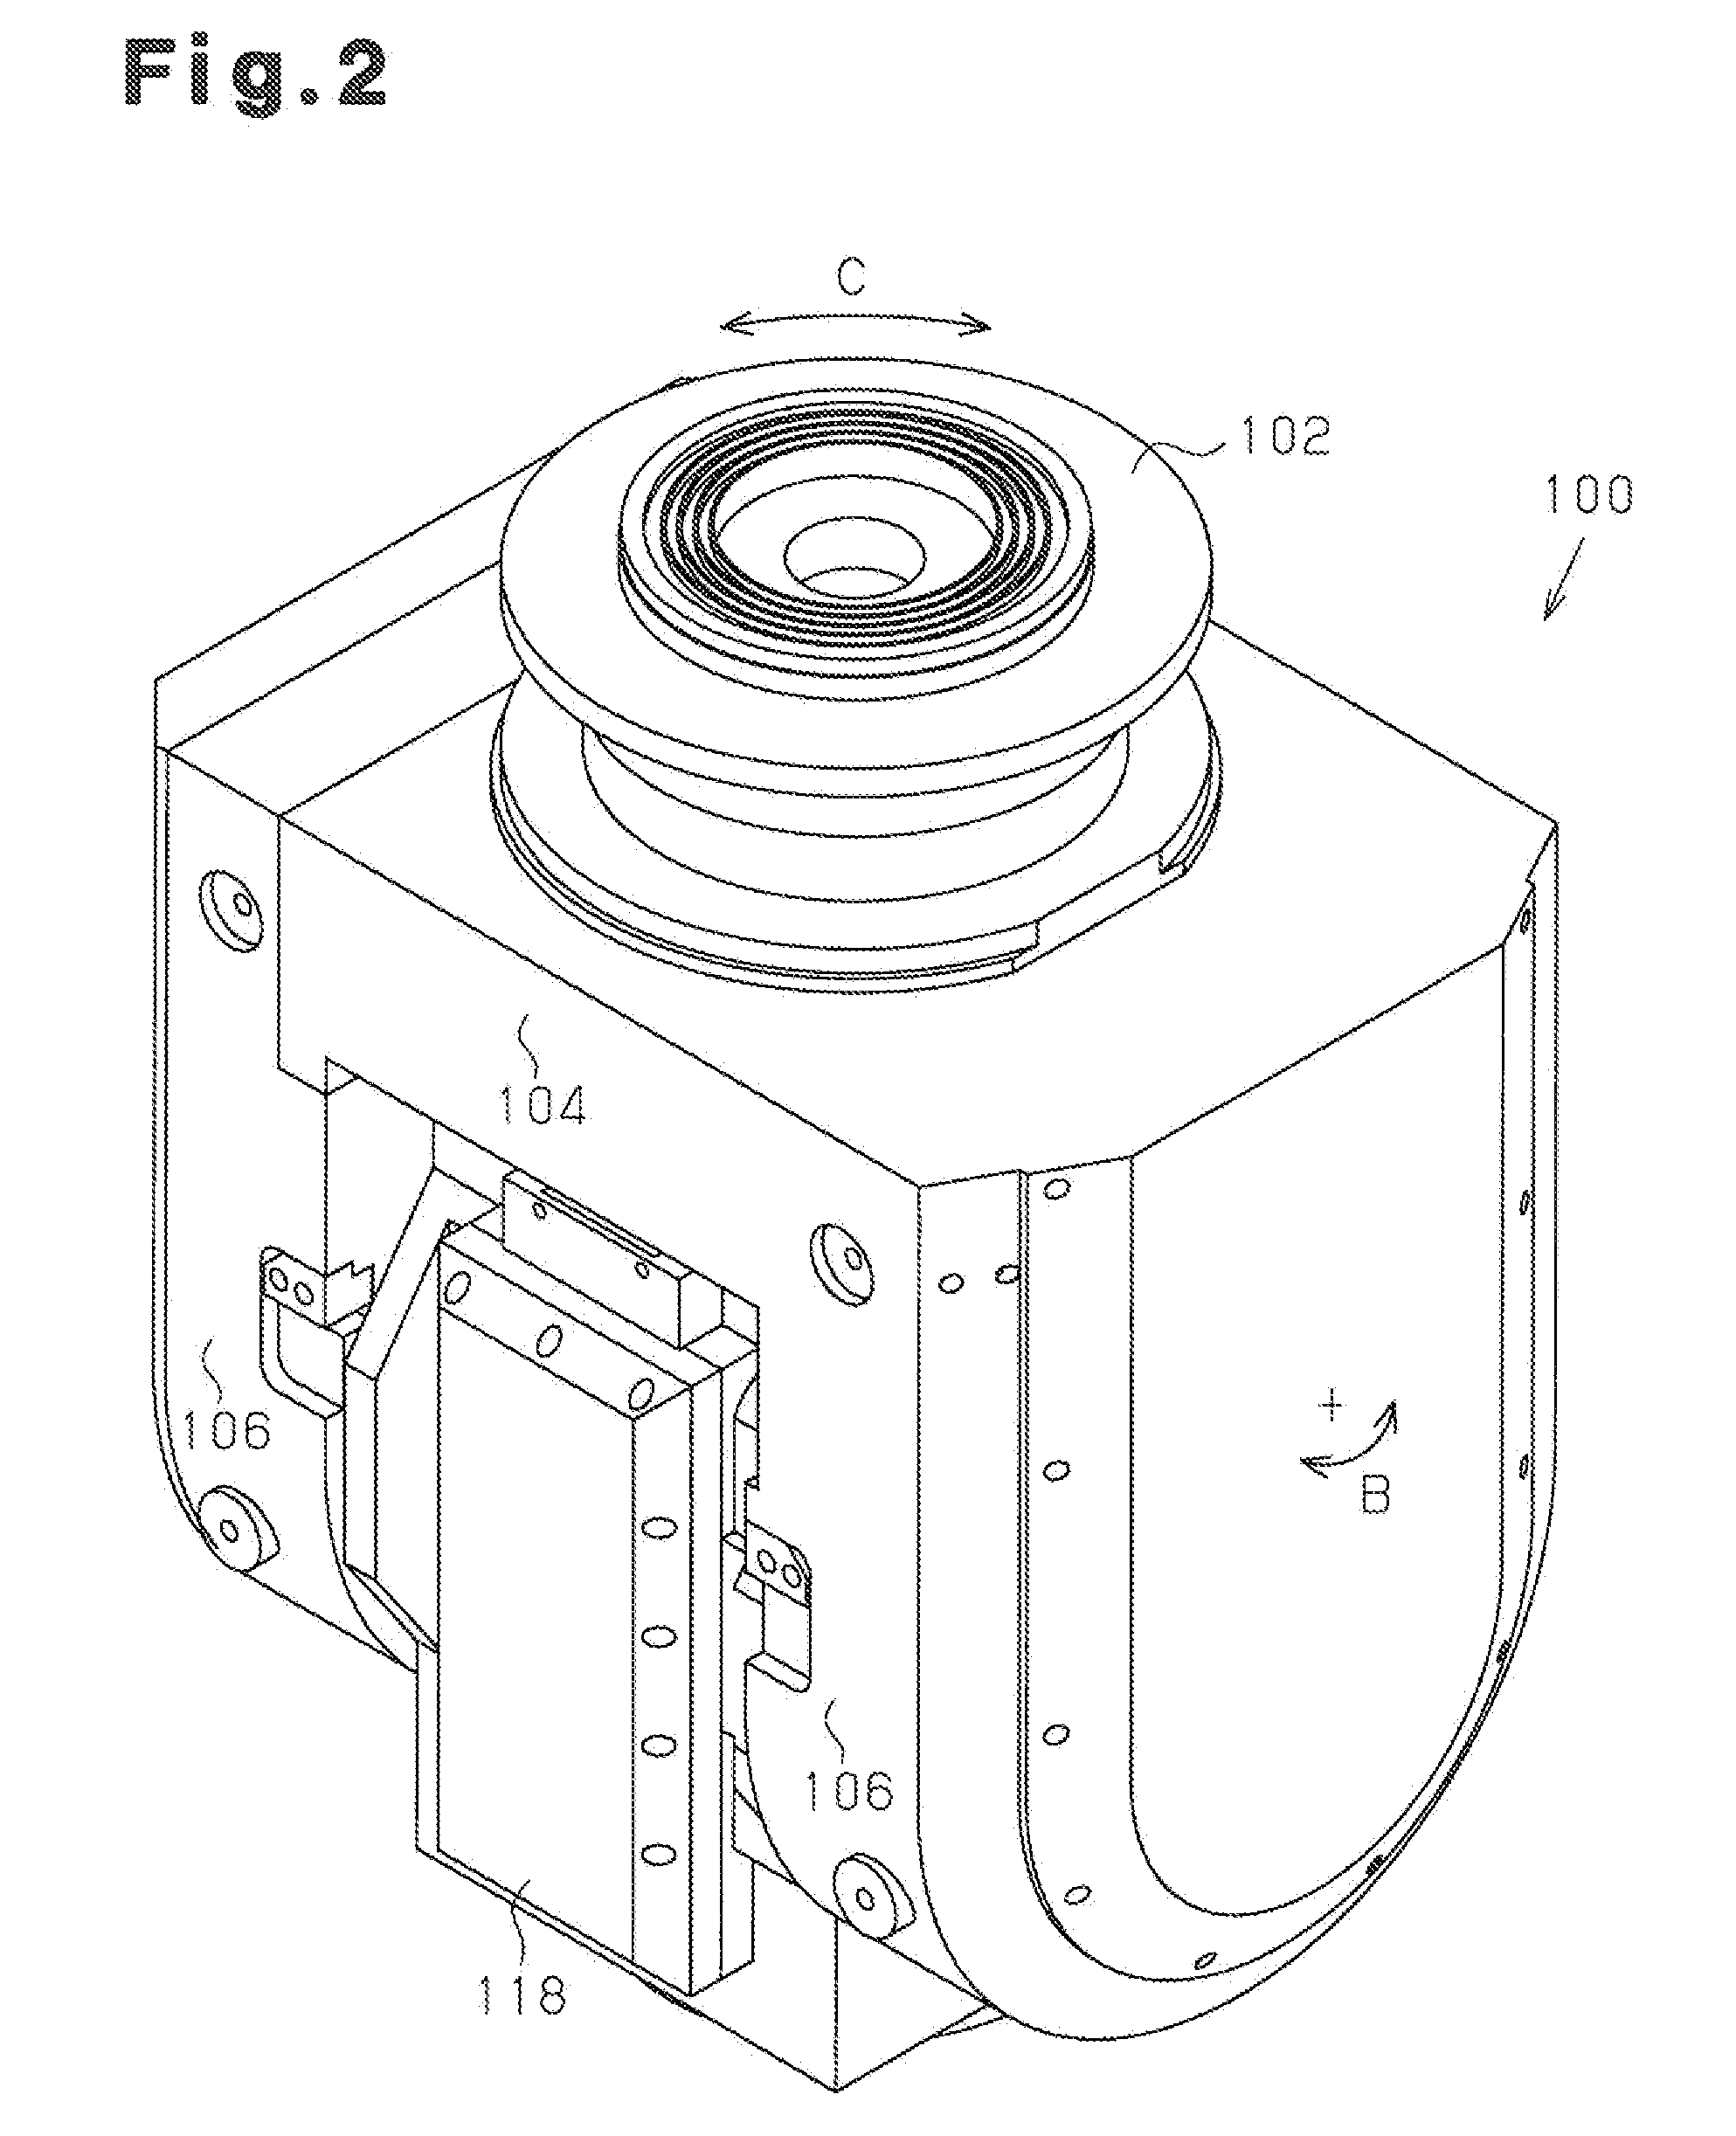 Method of boring work by 5-axis machining double-housing machine tool and 5-axis machining double-housing machine tool